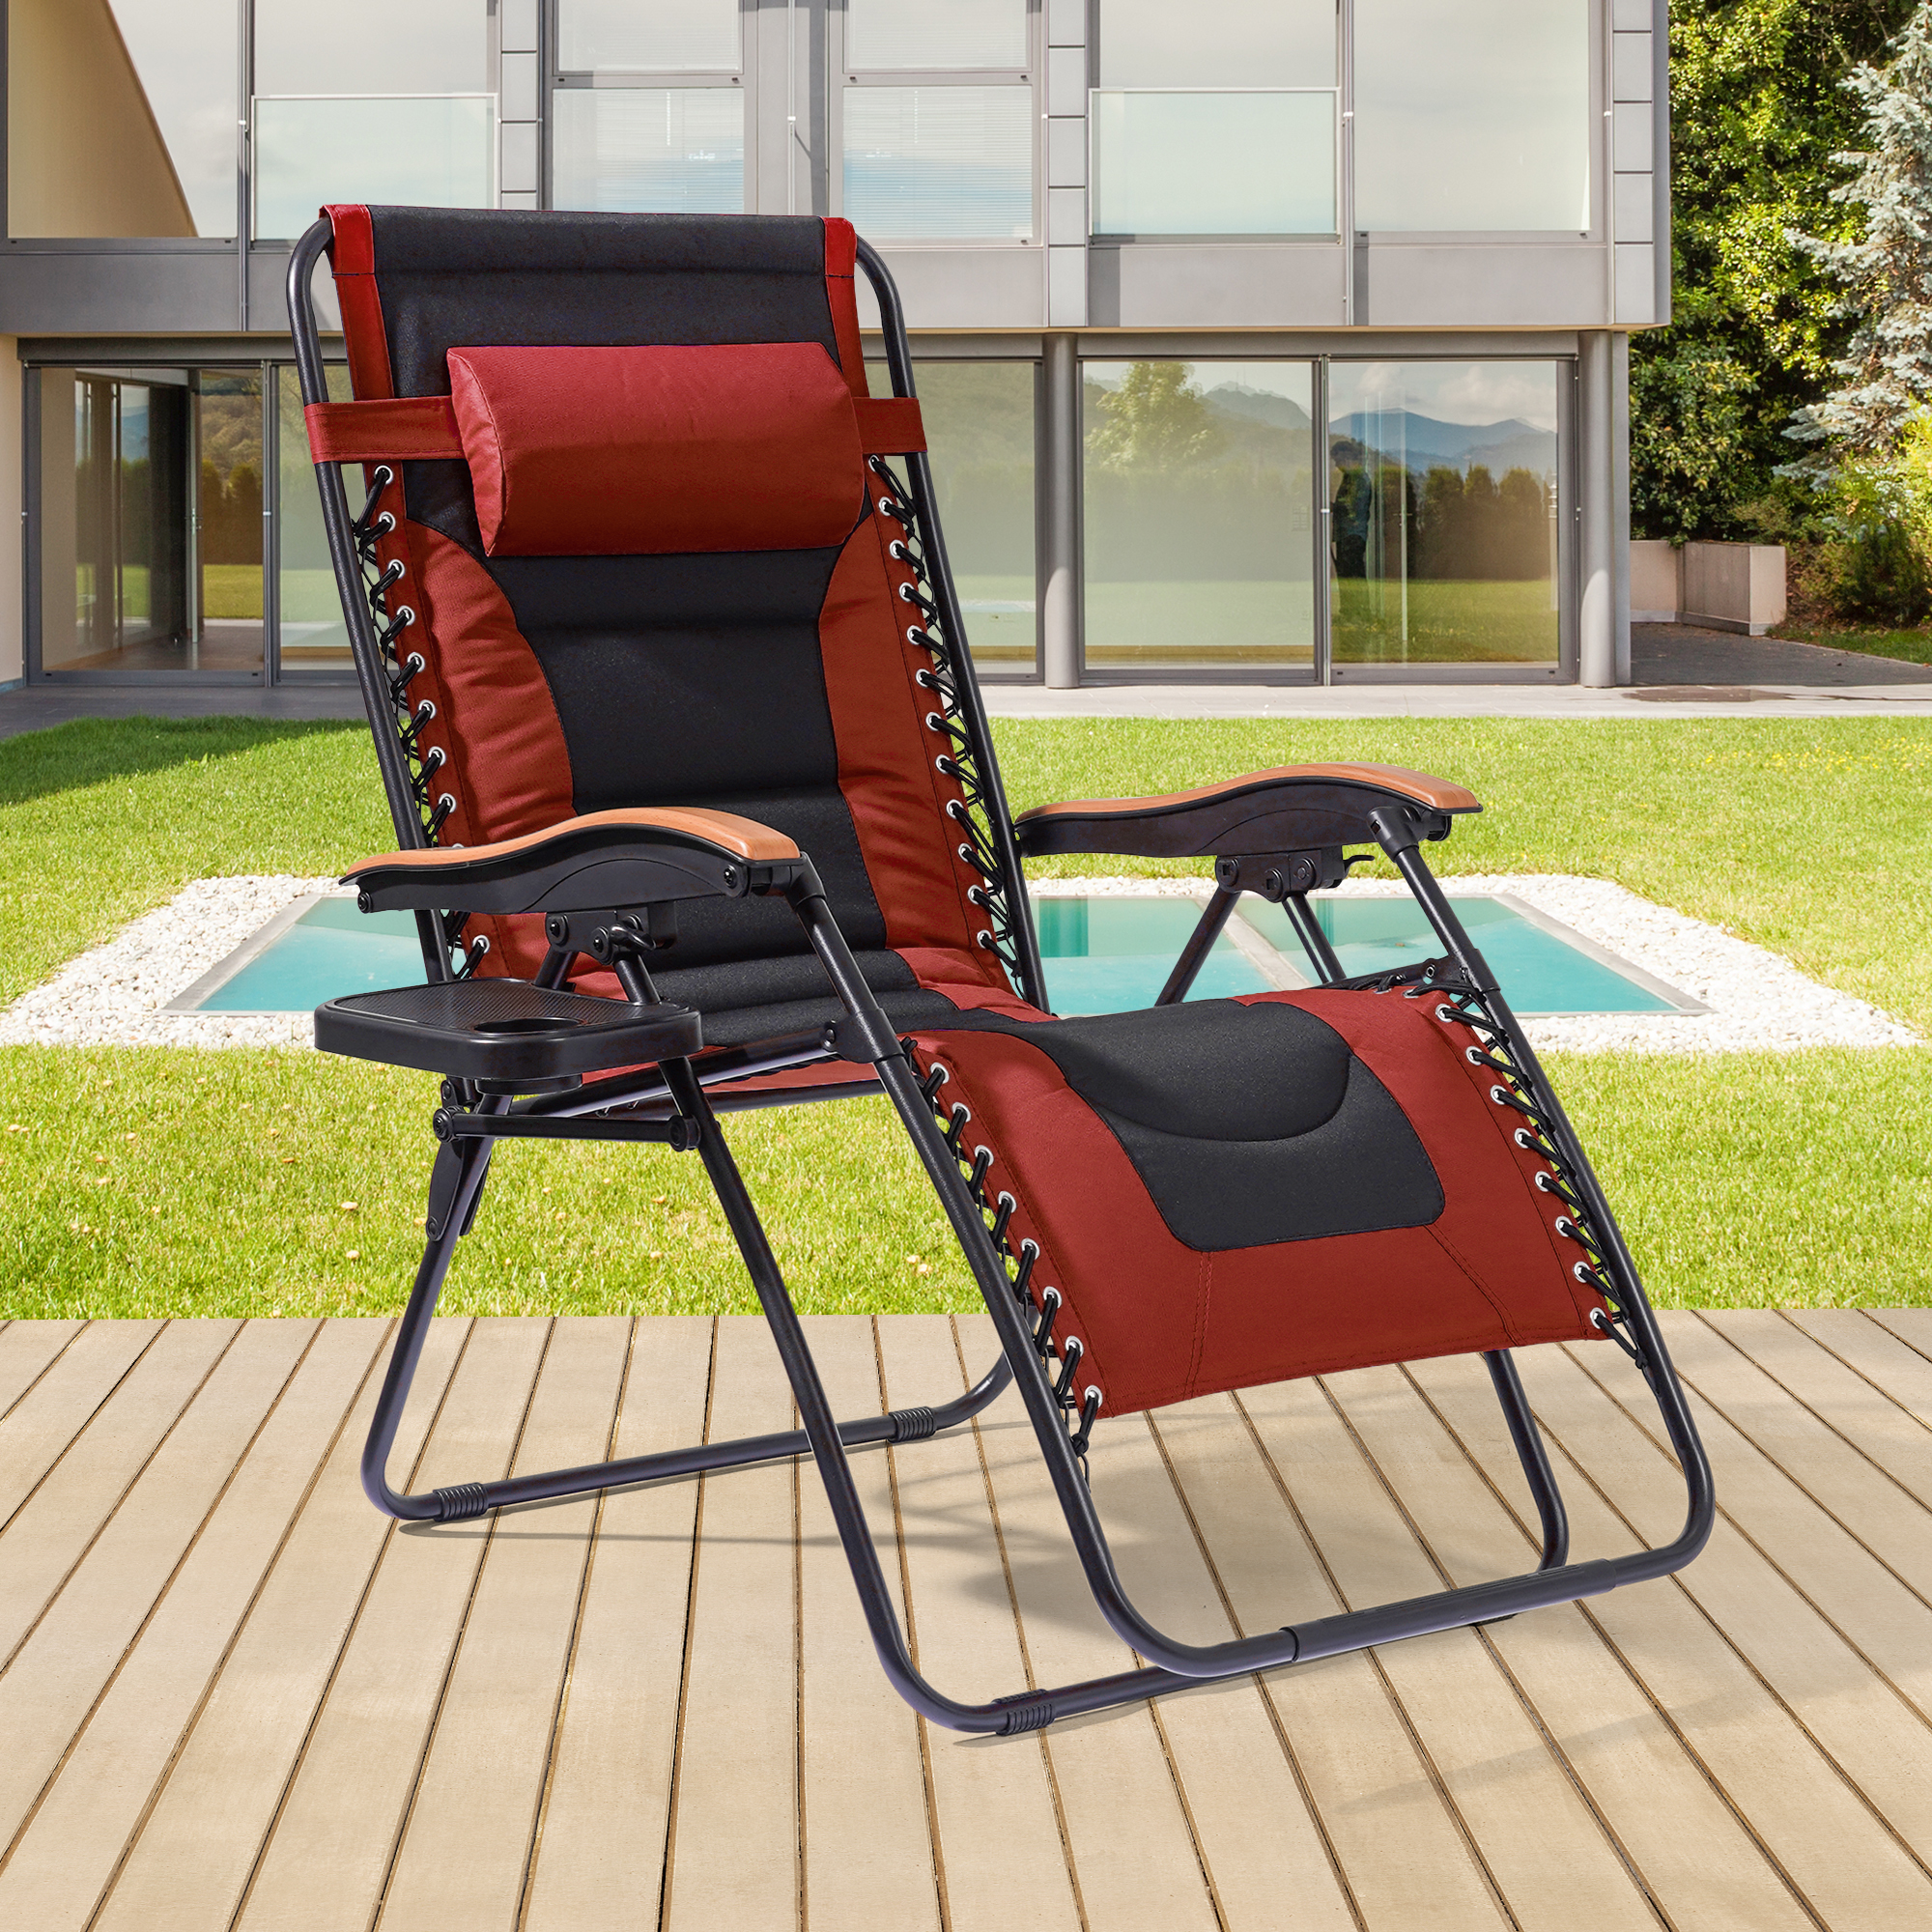 Sonerlic 1Pcs Outdoor Patio Adjustable Padded Zero Gravity Chair with a Side Tray for Patio, Deck, Poolside and Garden,Red - image 1 of 9